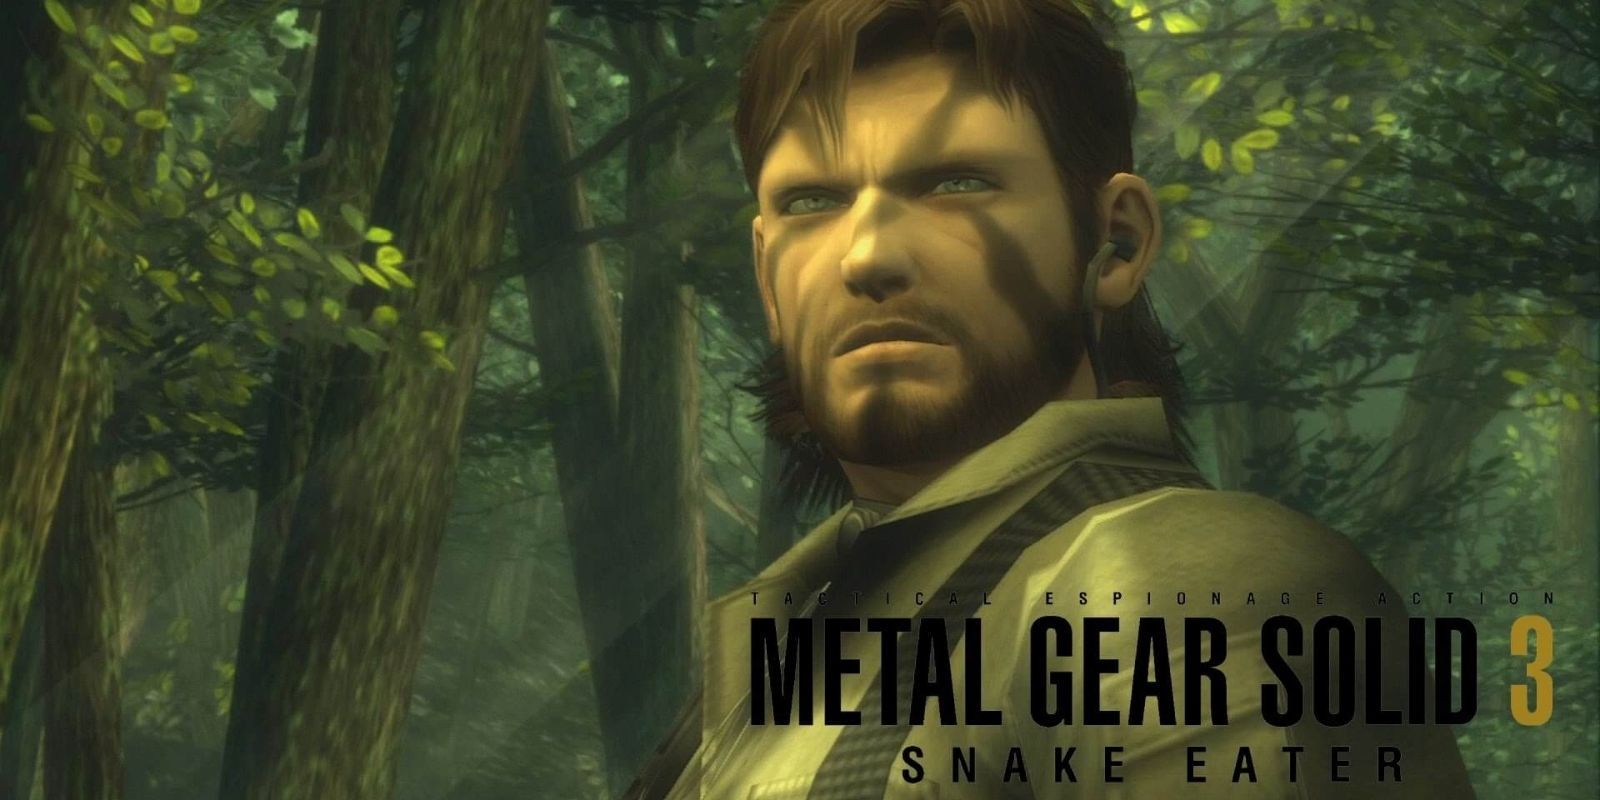 Solid Snake in a forest in Metal Gear Solid 3: Snake Eater